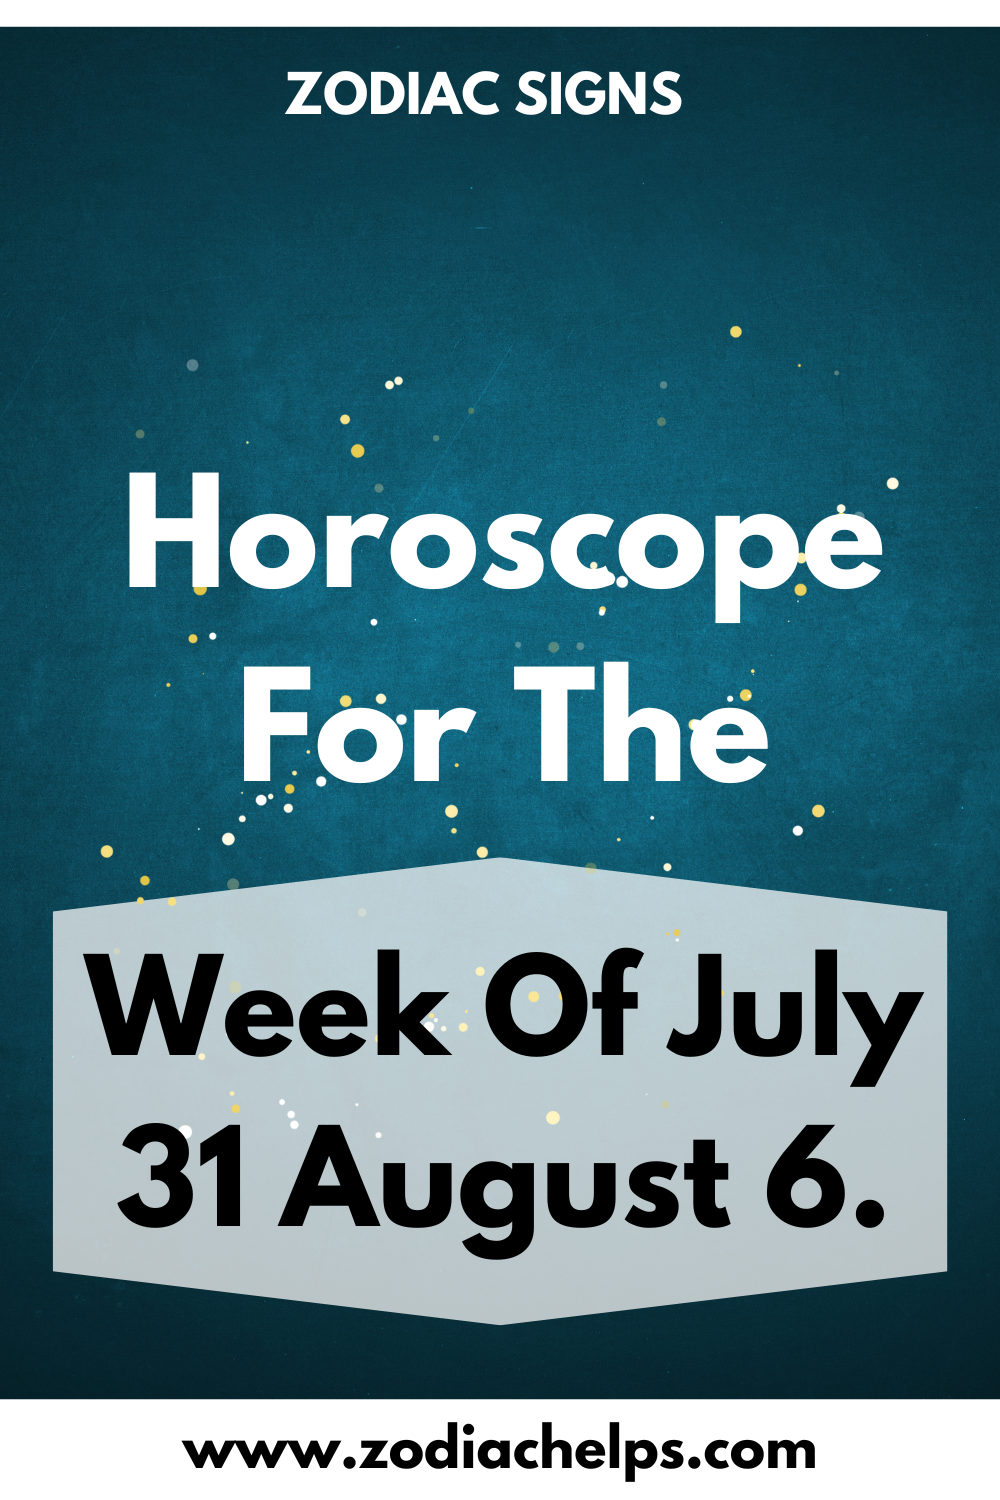 Horoscope For The Week Of July 31 August 6.